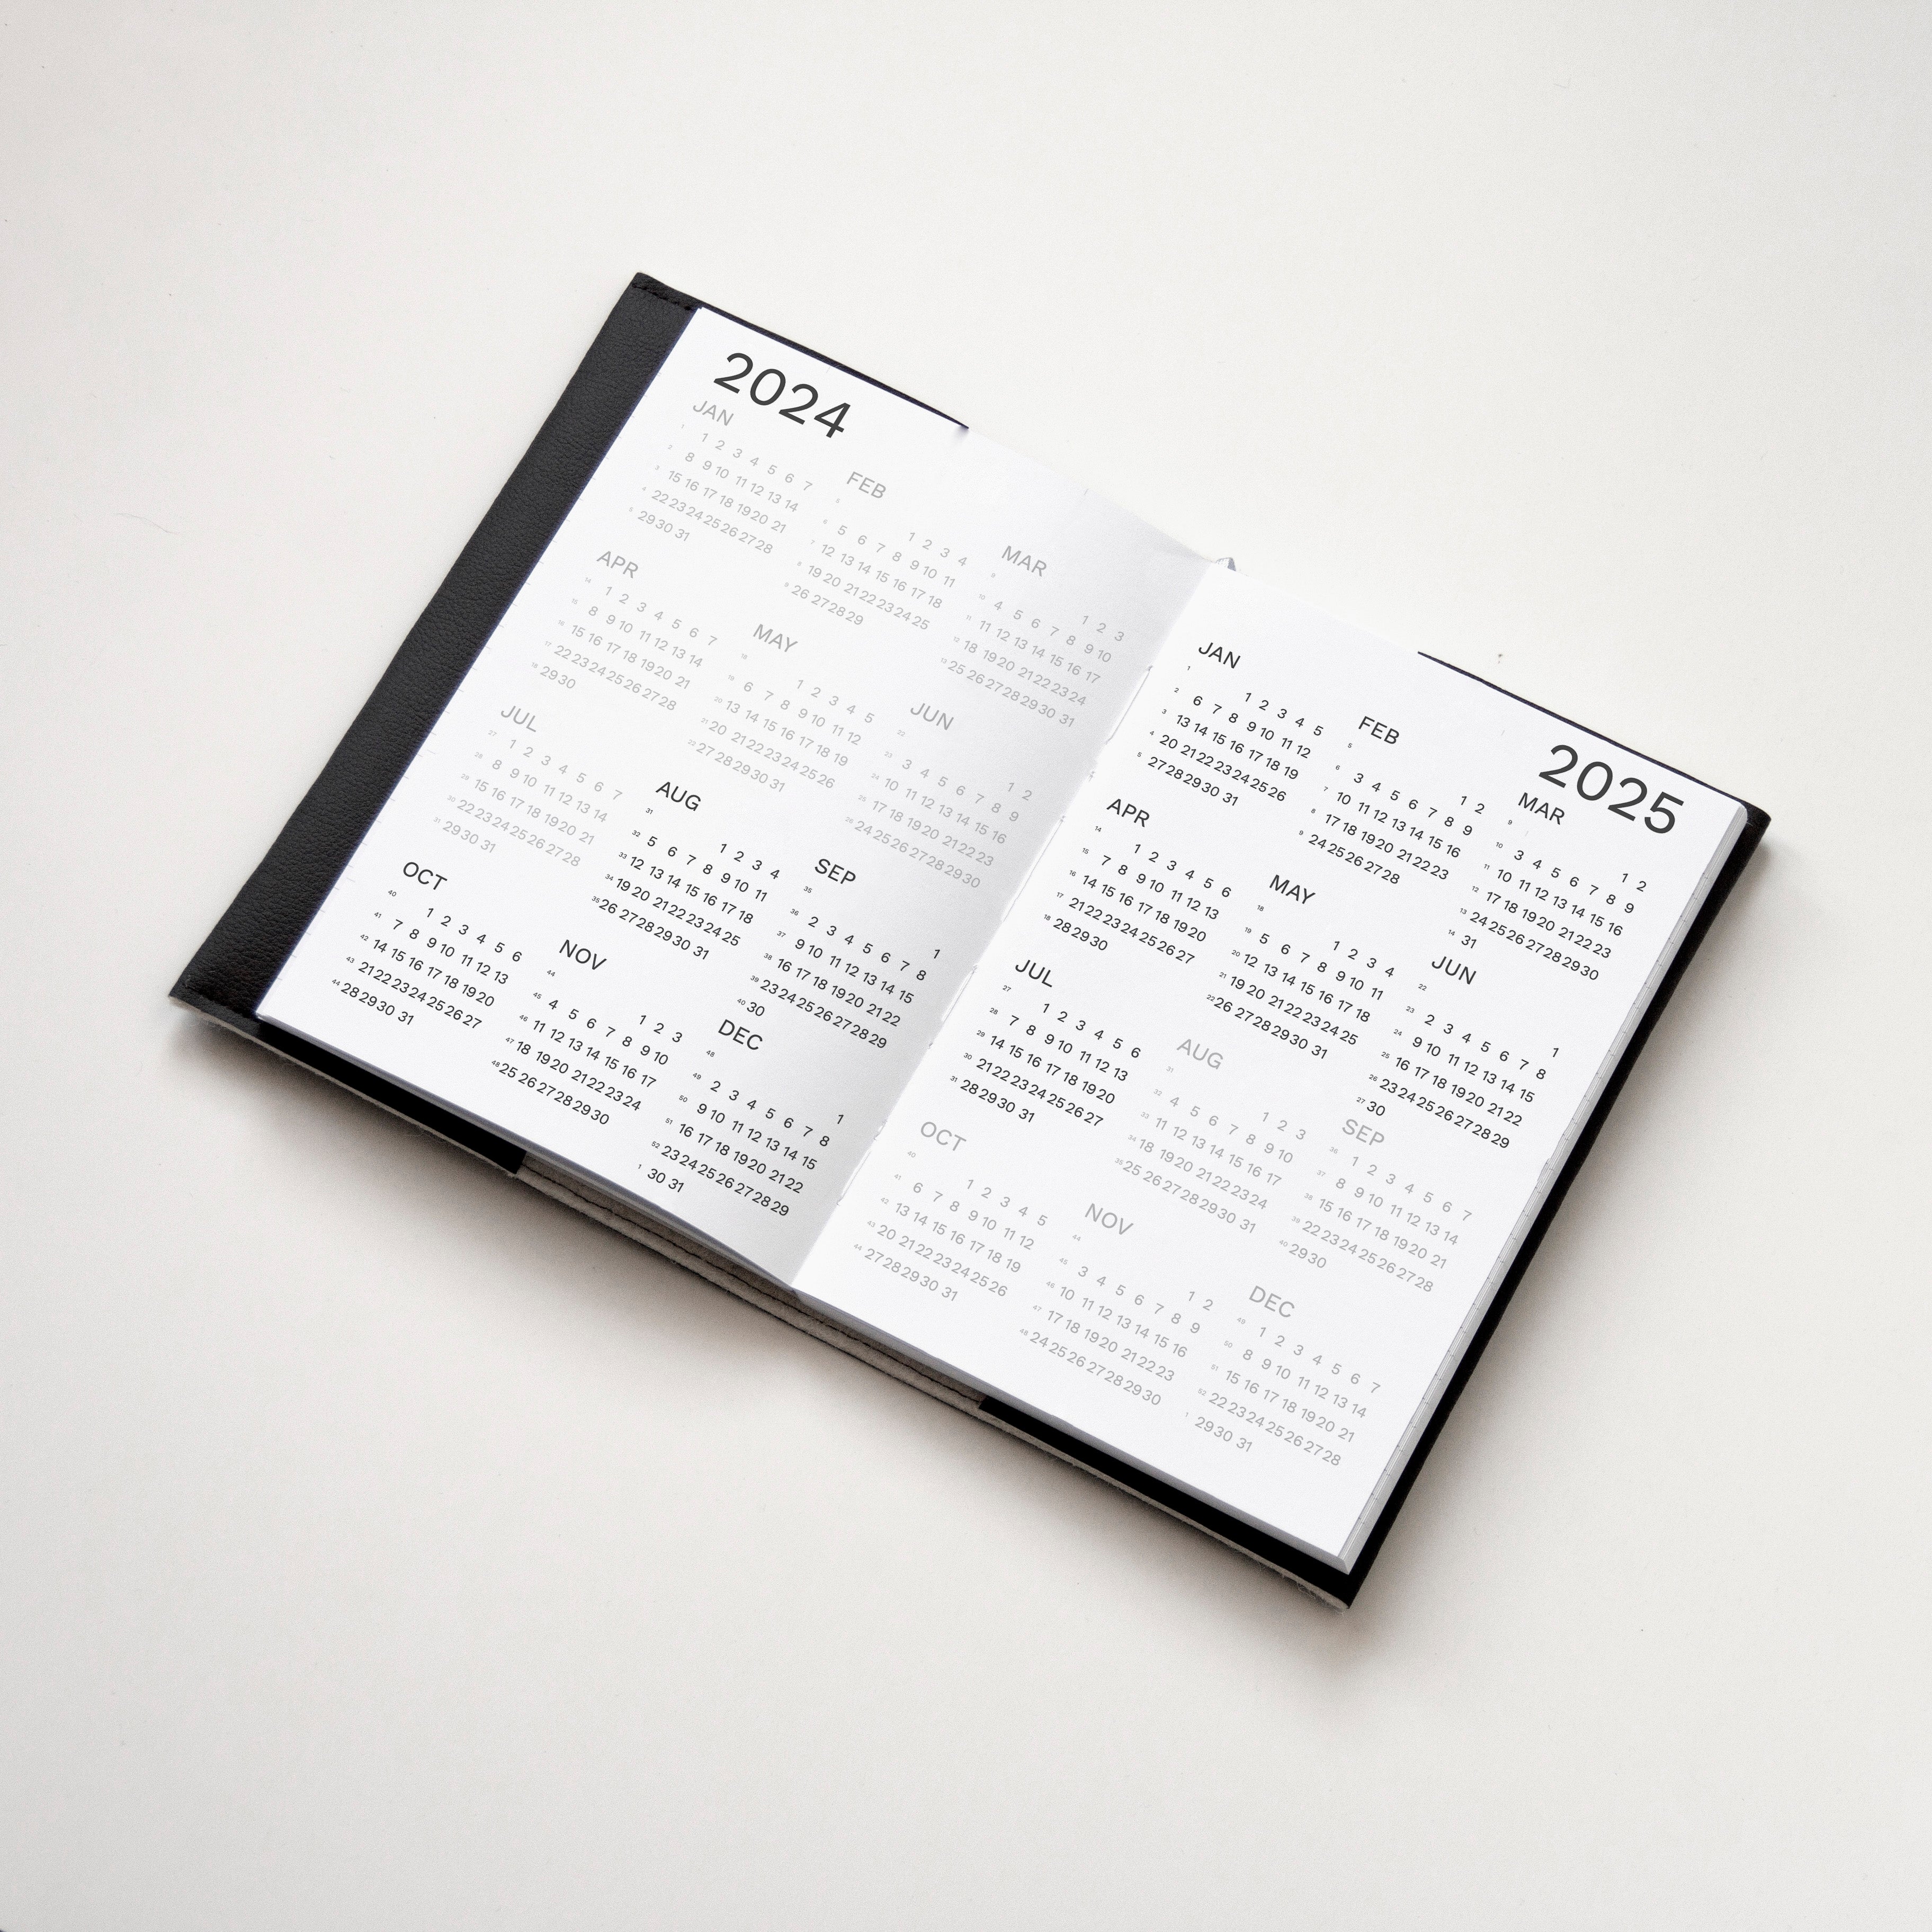 Two years - 2024/2025 PRO Weekly Planner Similar A5 size from Octàgon Design